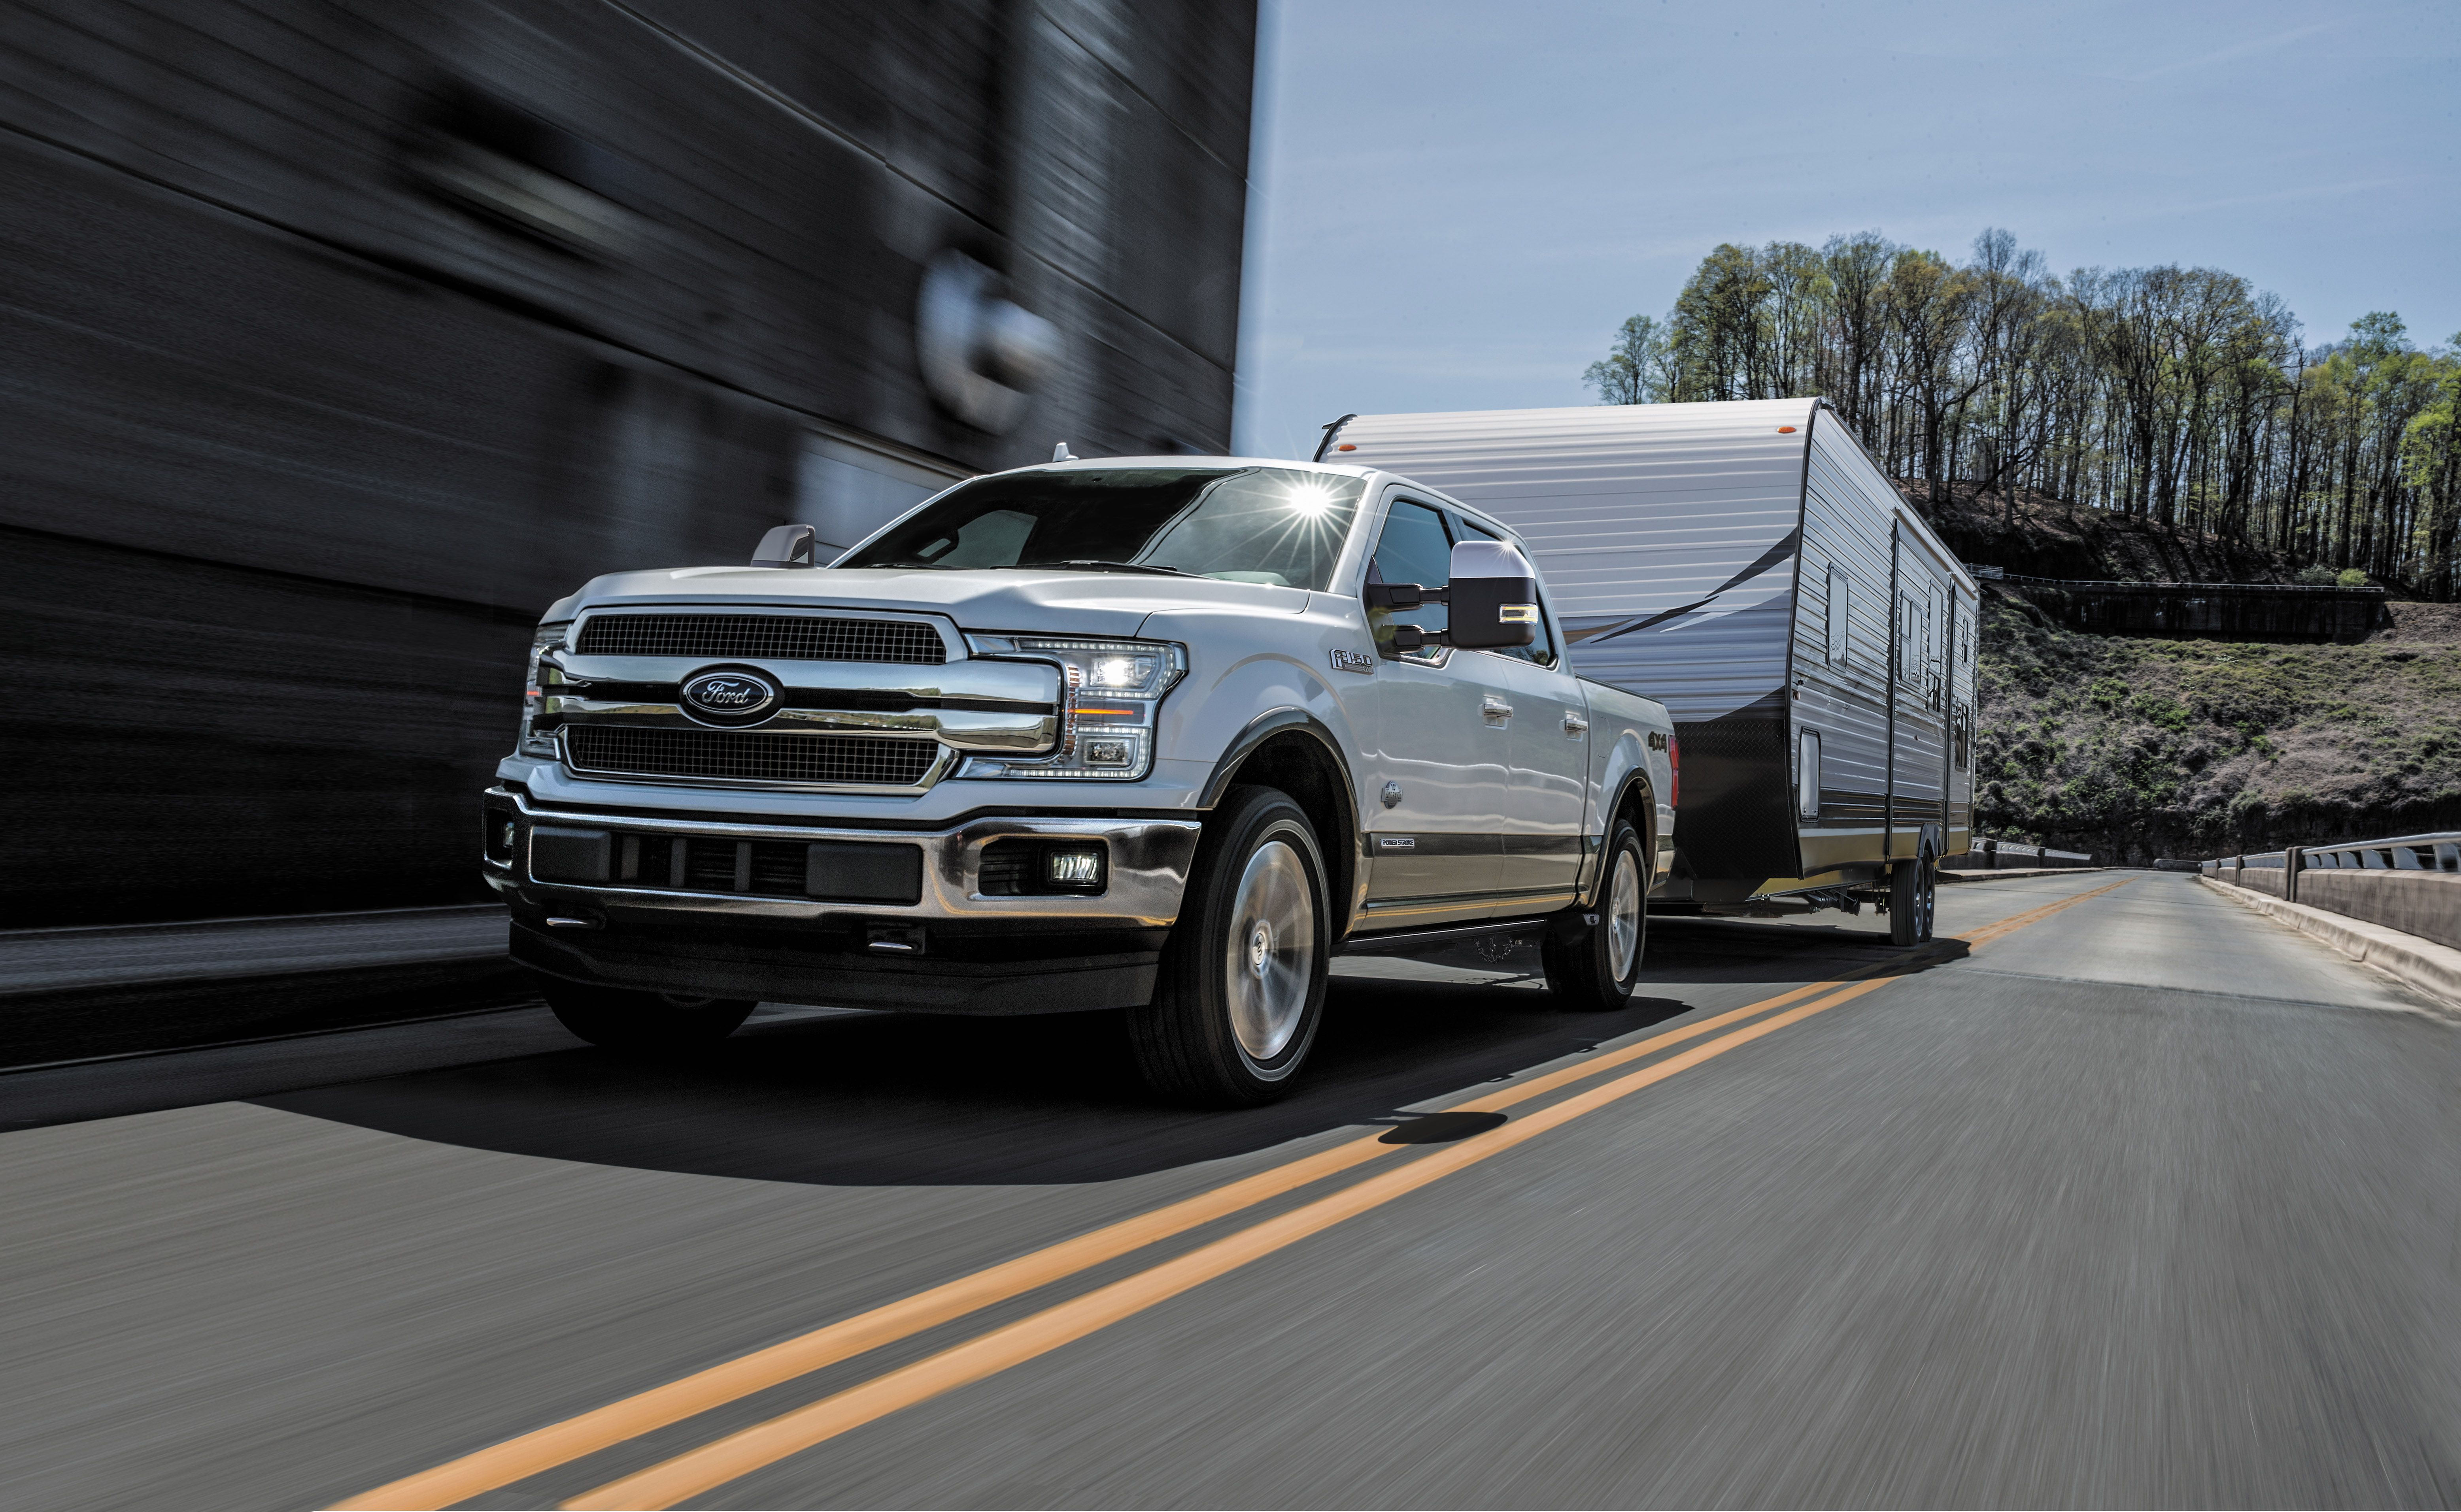 The 2018 Ford F-150 on the road.